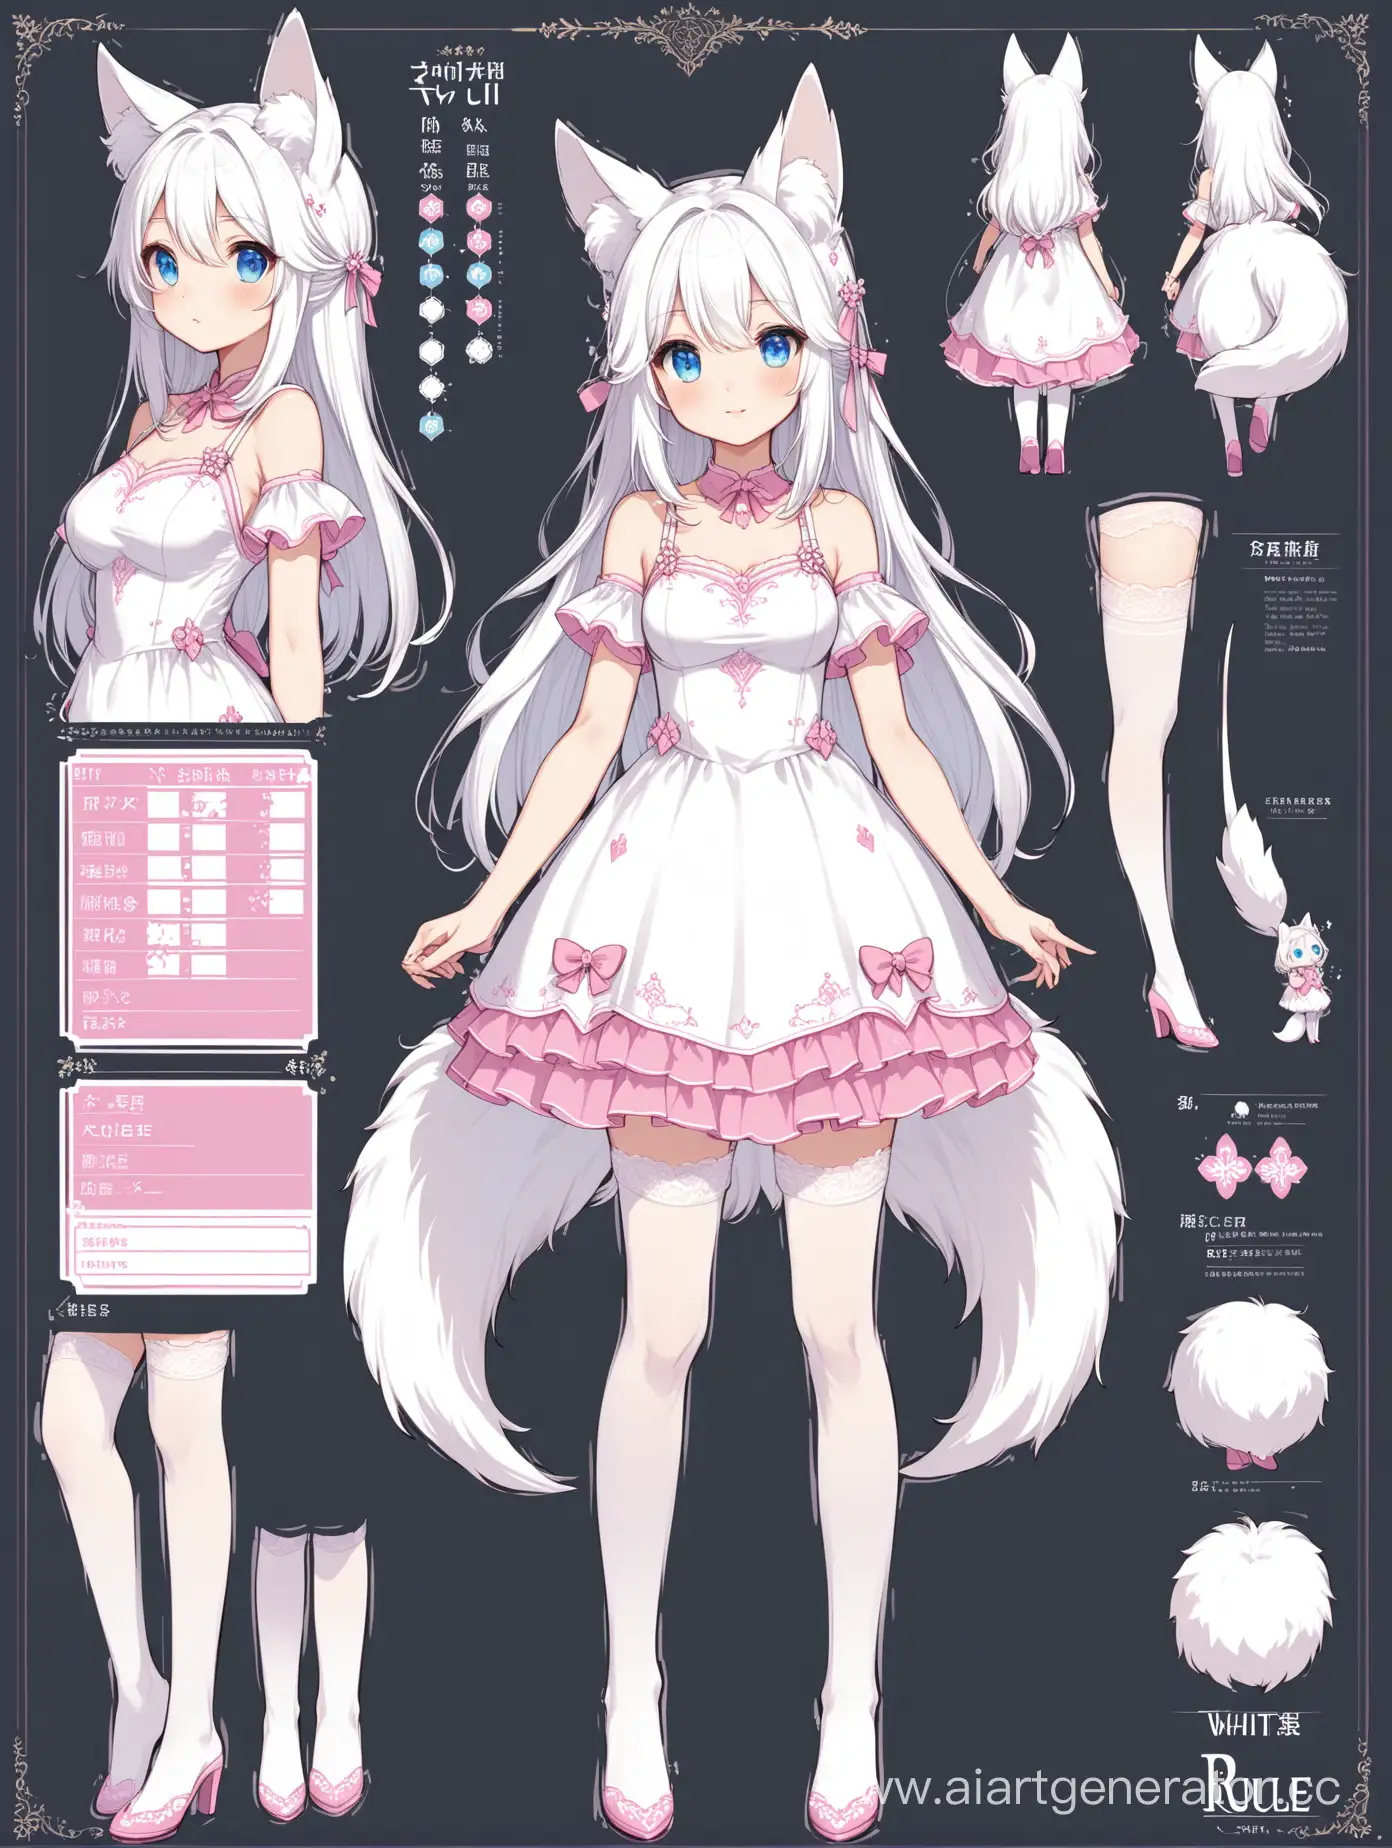 Full length character sheet, a girl with white hair and bright blue eyes, white long animal ears and a short fluffy white tail, a short pink dress and white stockings